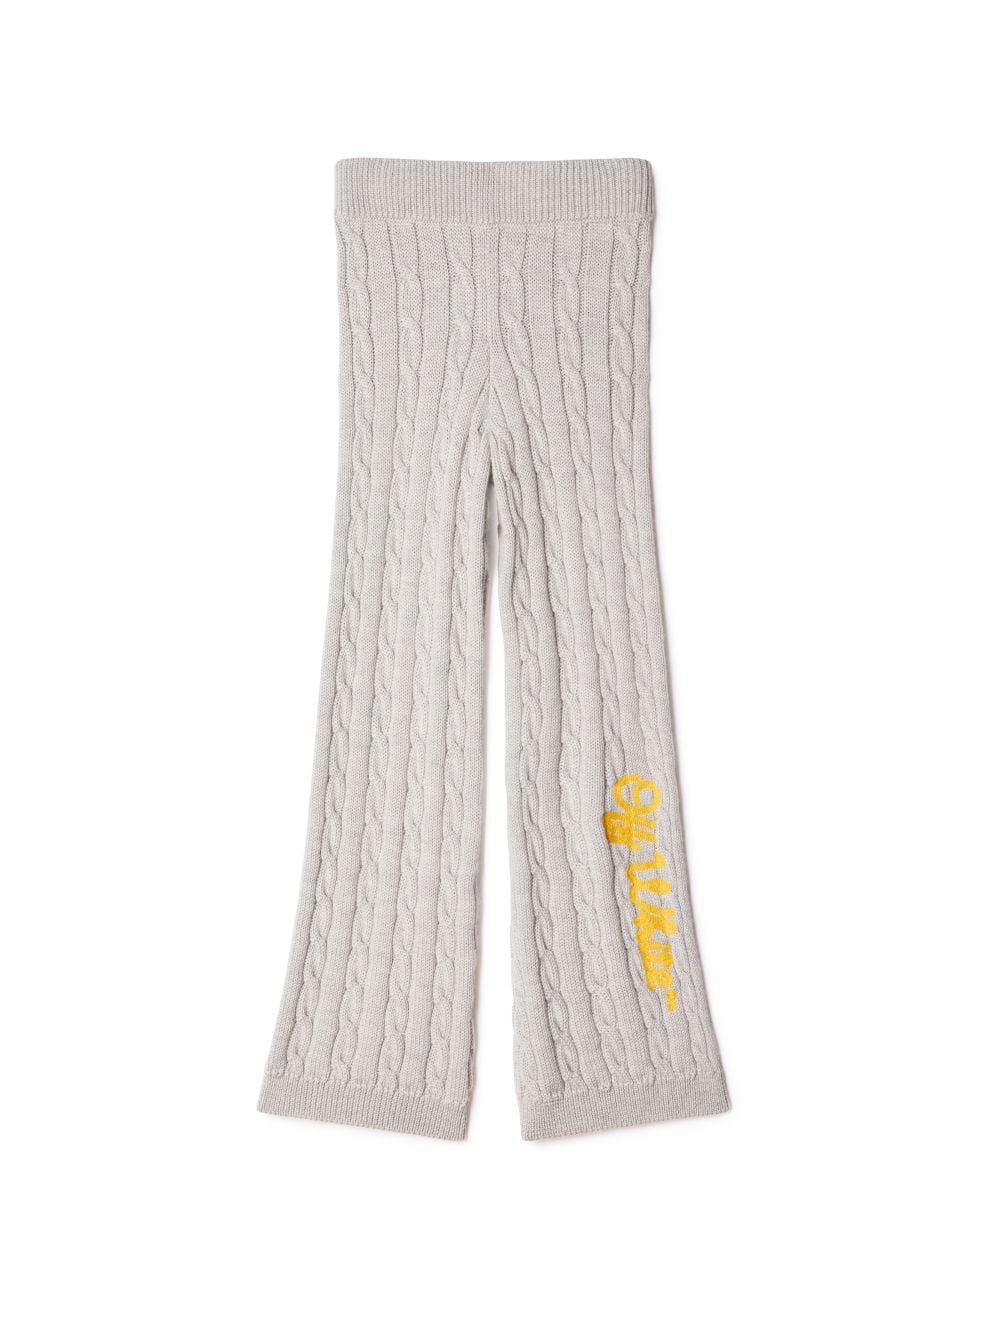 OFF SCRIPT CABLE KNIT PANT MELANGE GREY on Sale - Off-White™ Official AQ